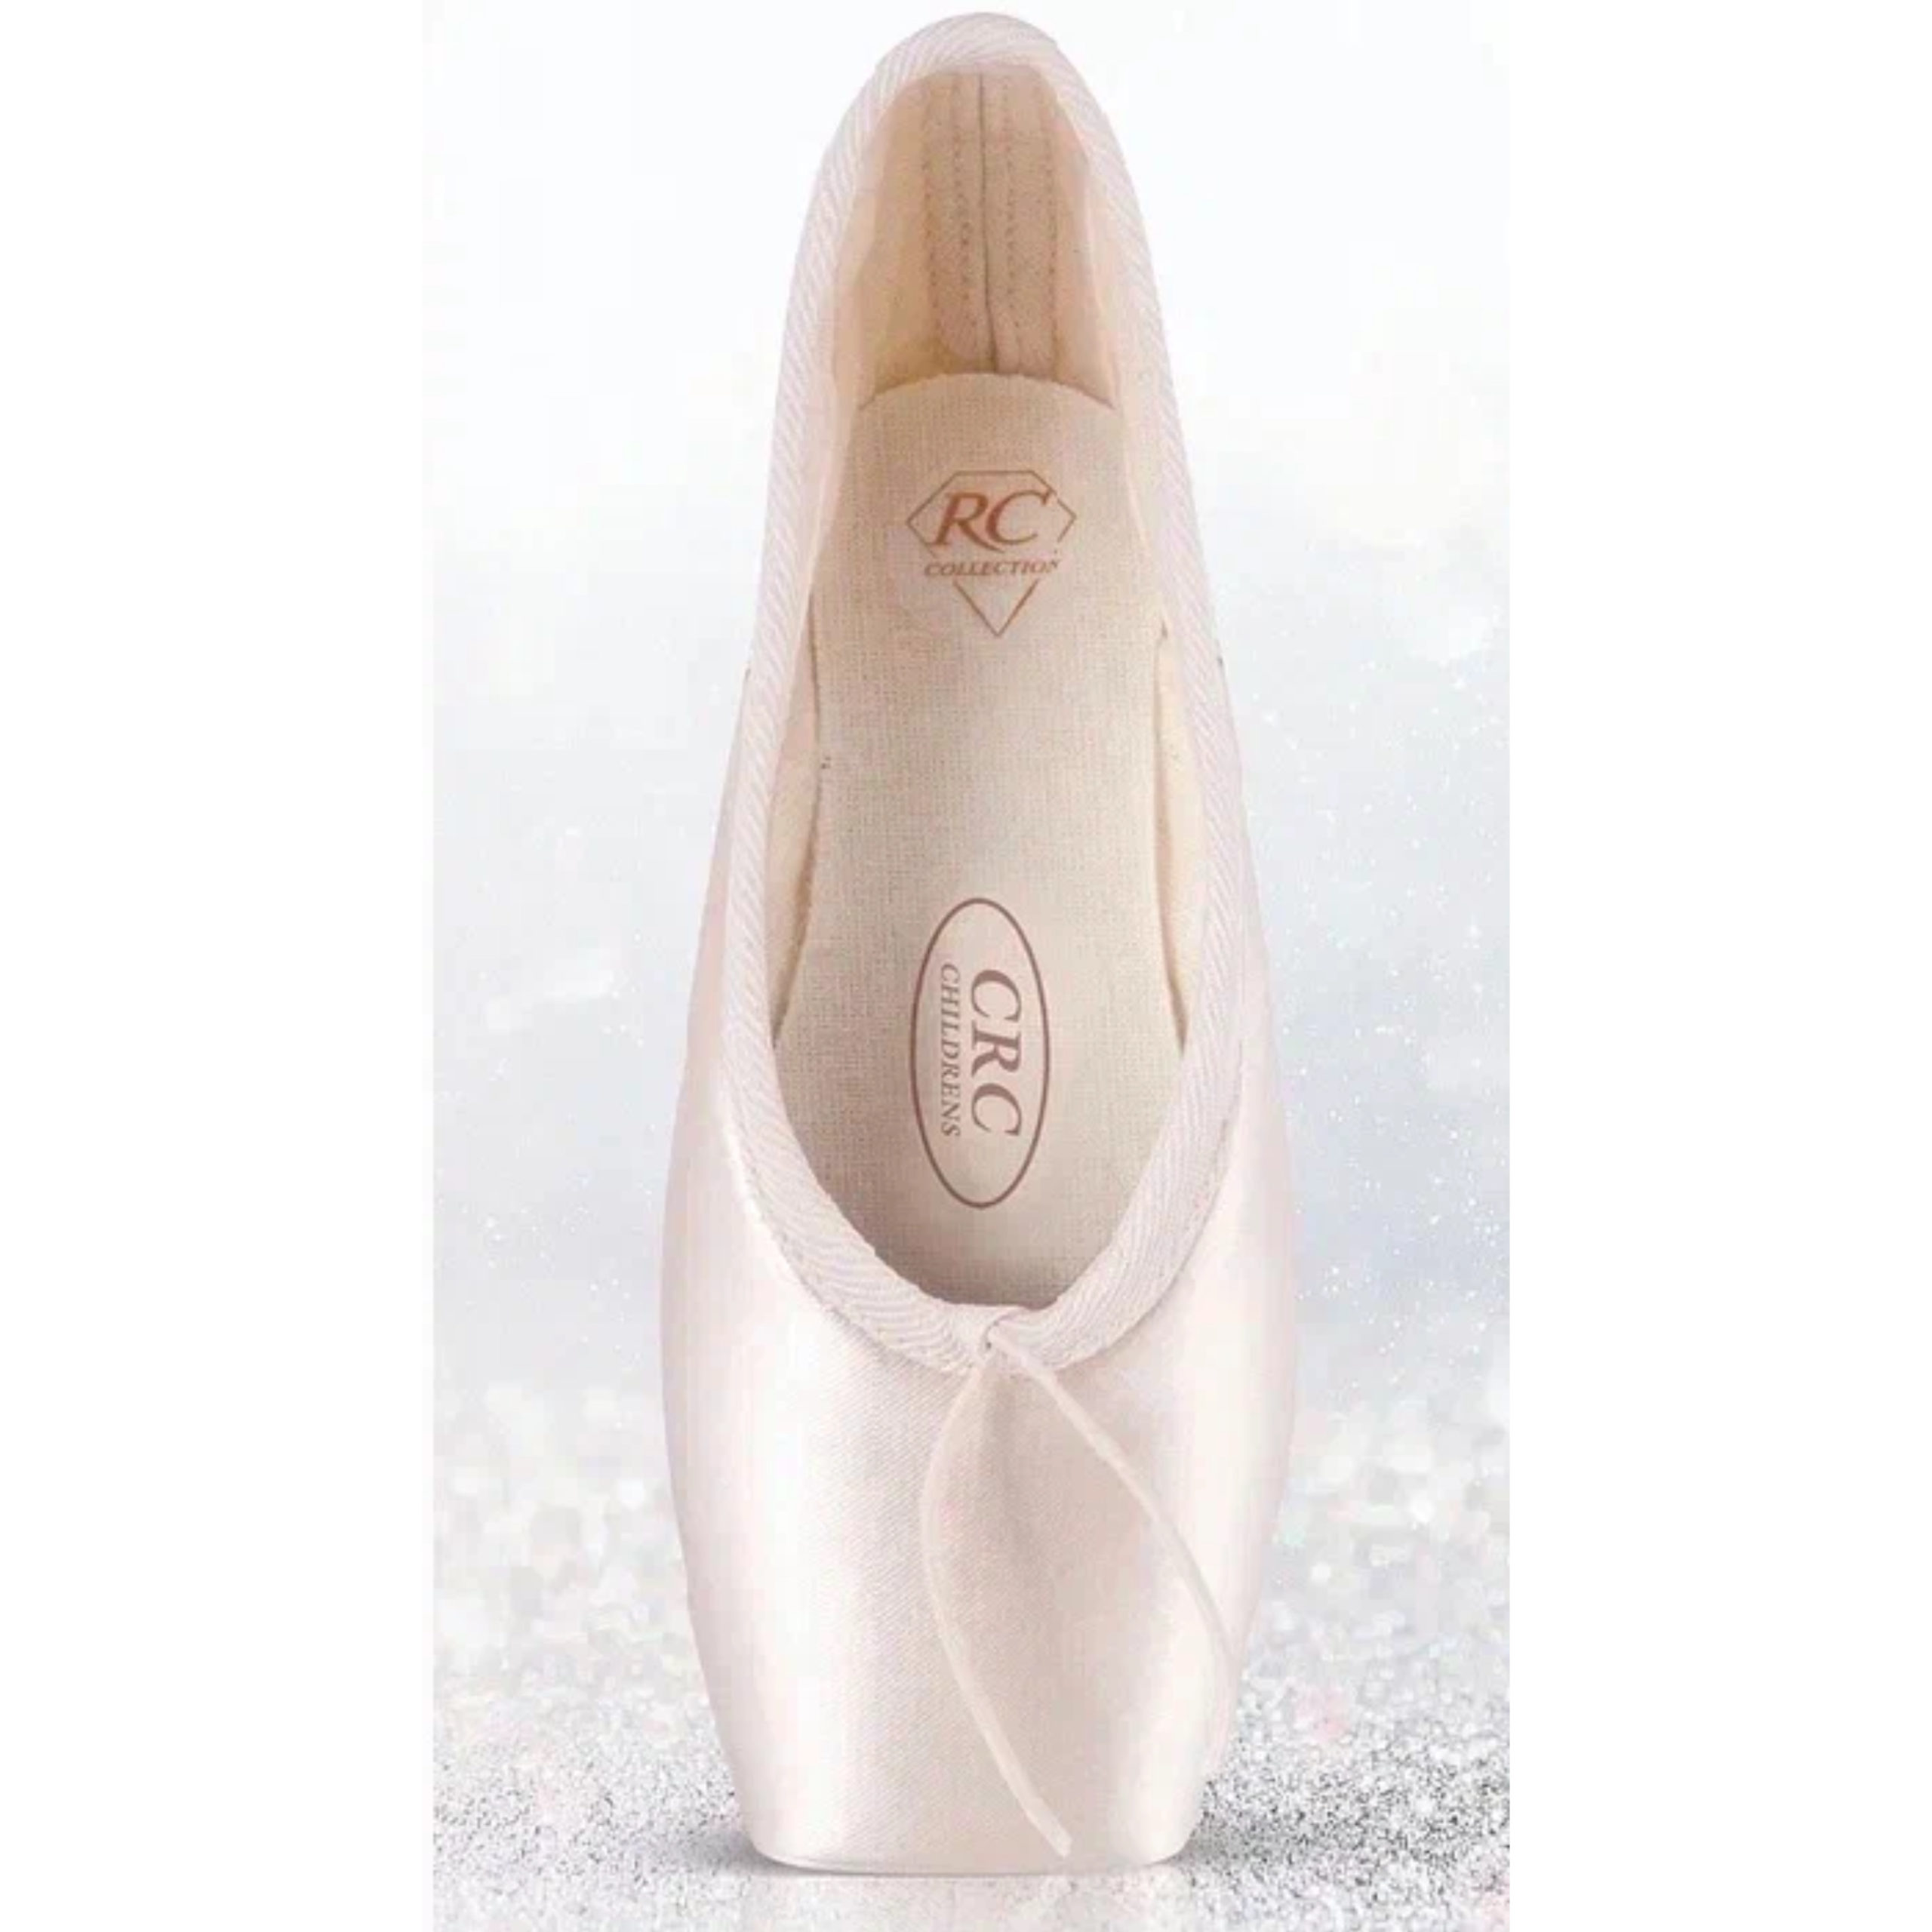 Children's pointe shoes - CRC collection